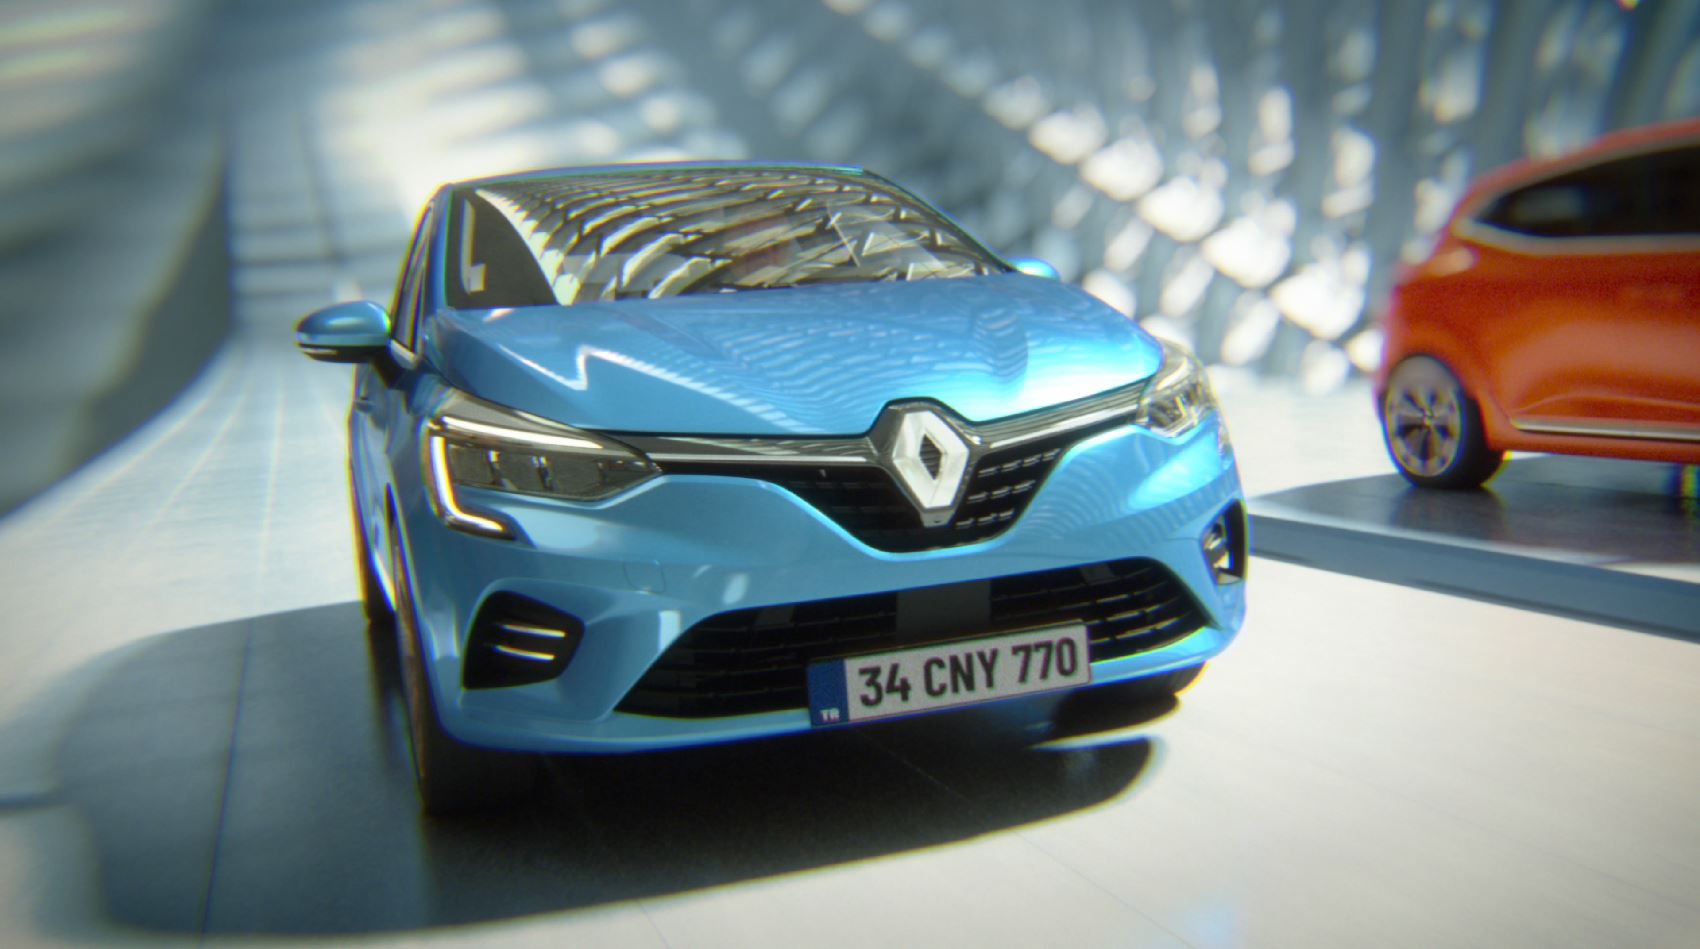 Juice Teams up with Depo Films for Renault Turkey CG Spots